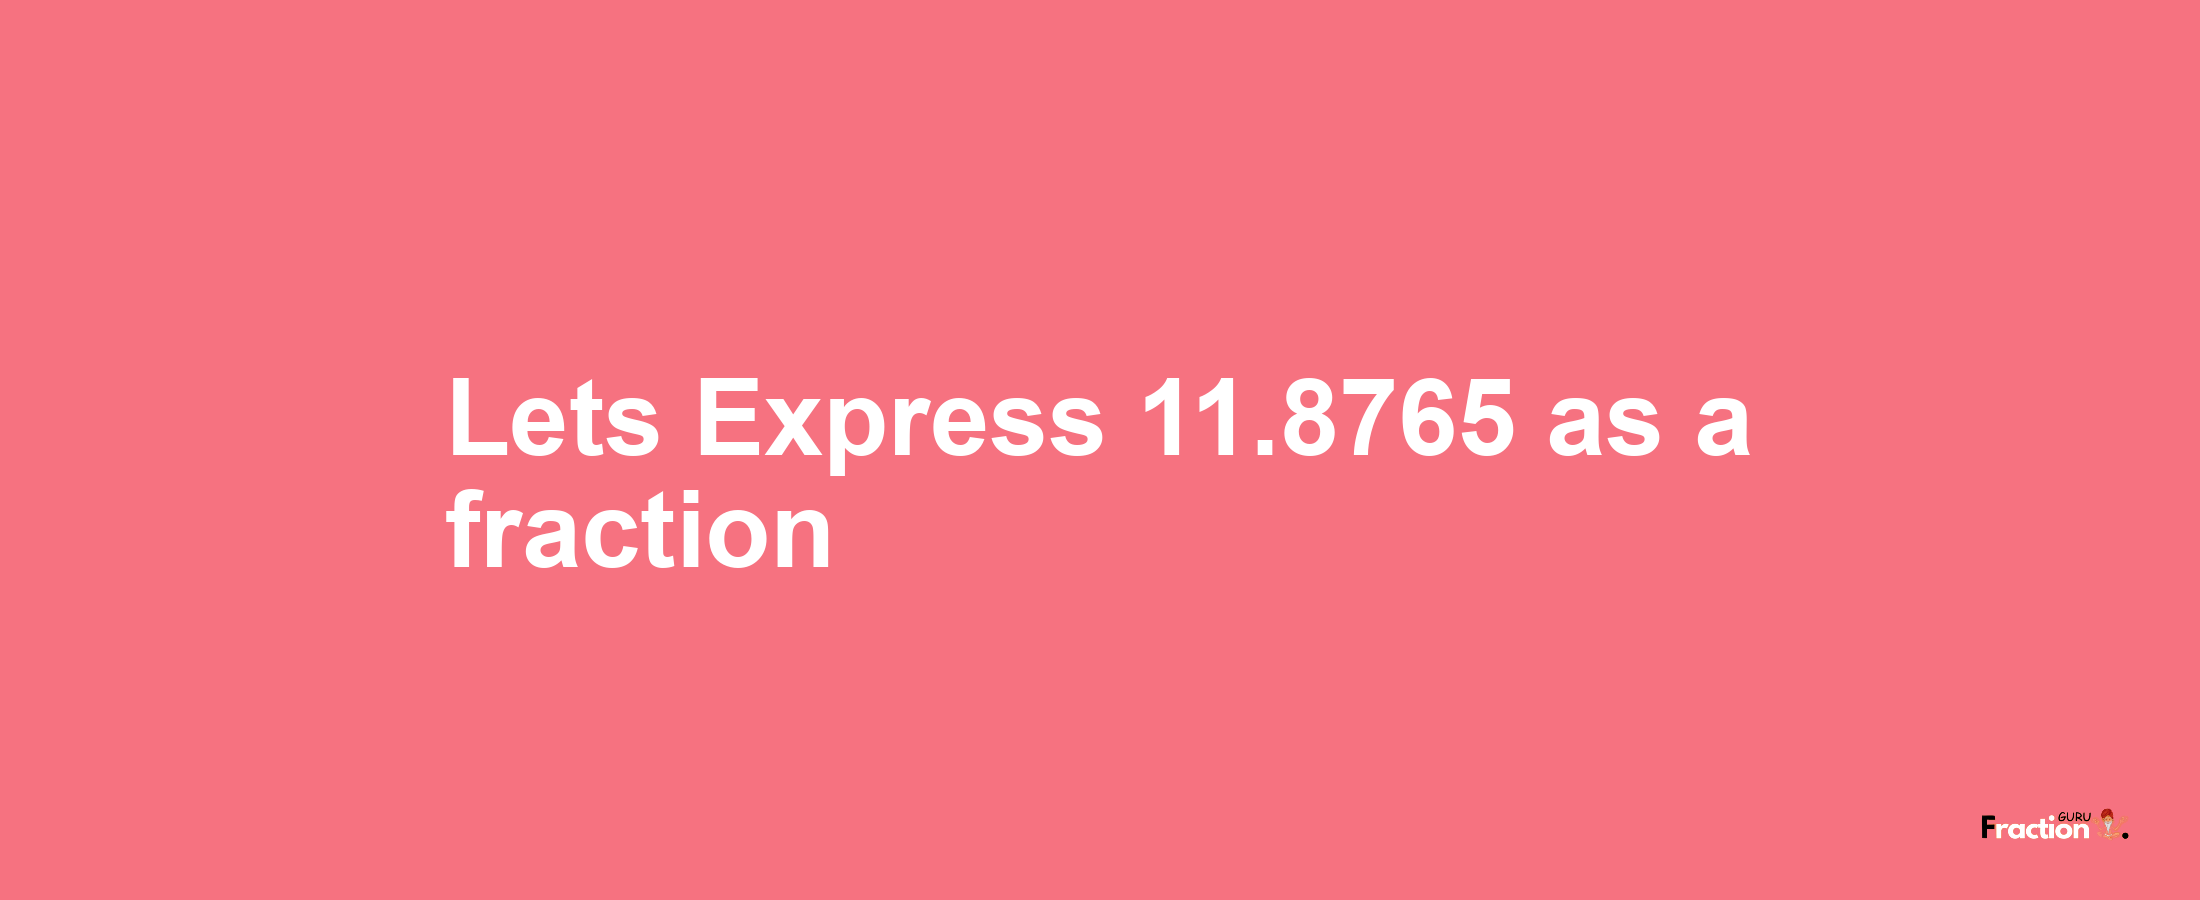 Lets Express 11.8765 as afraction